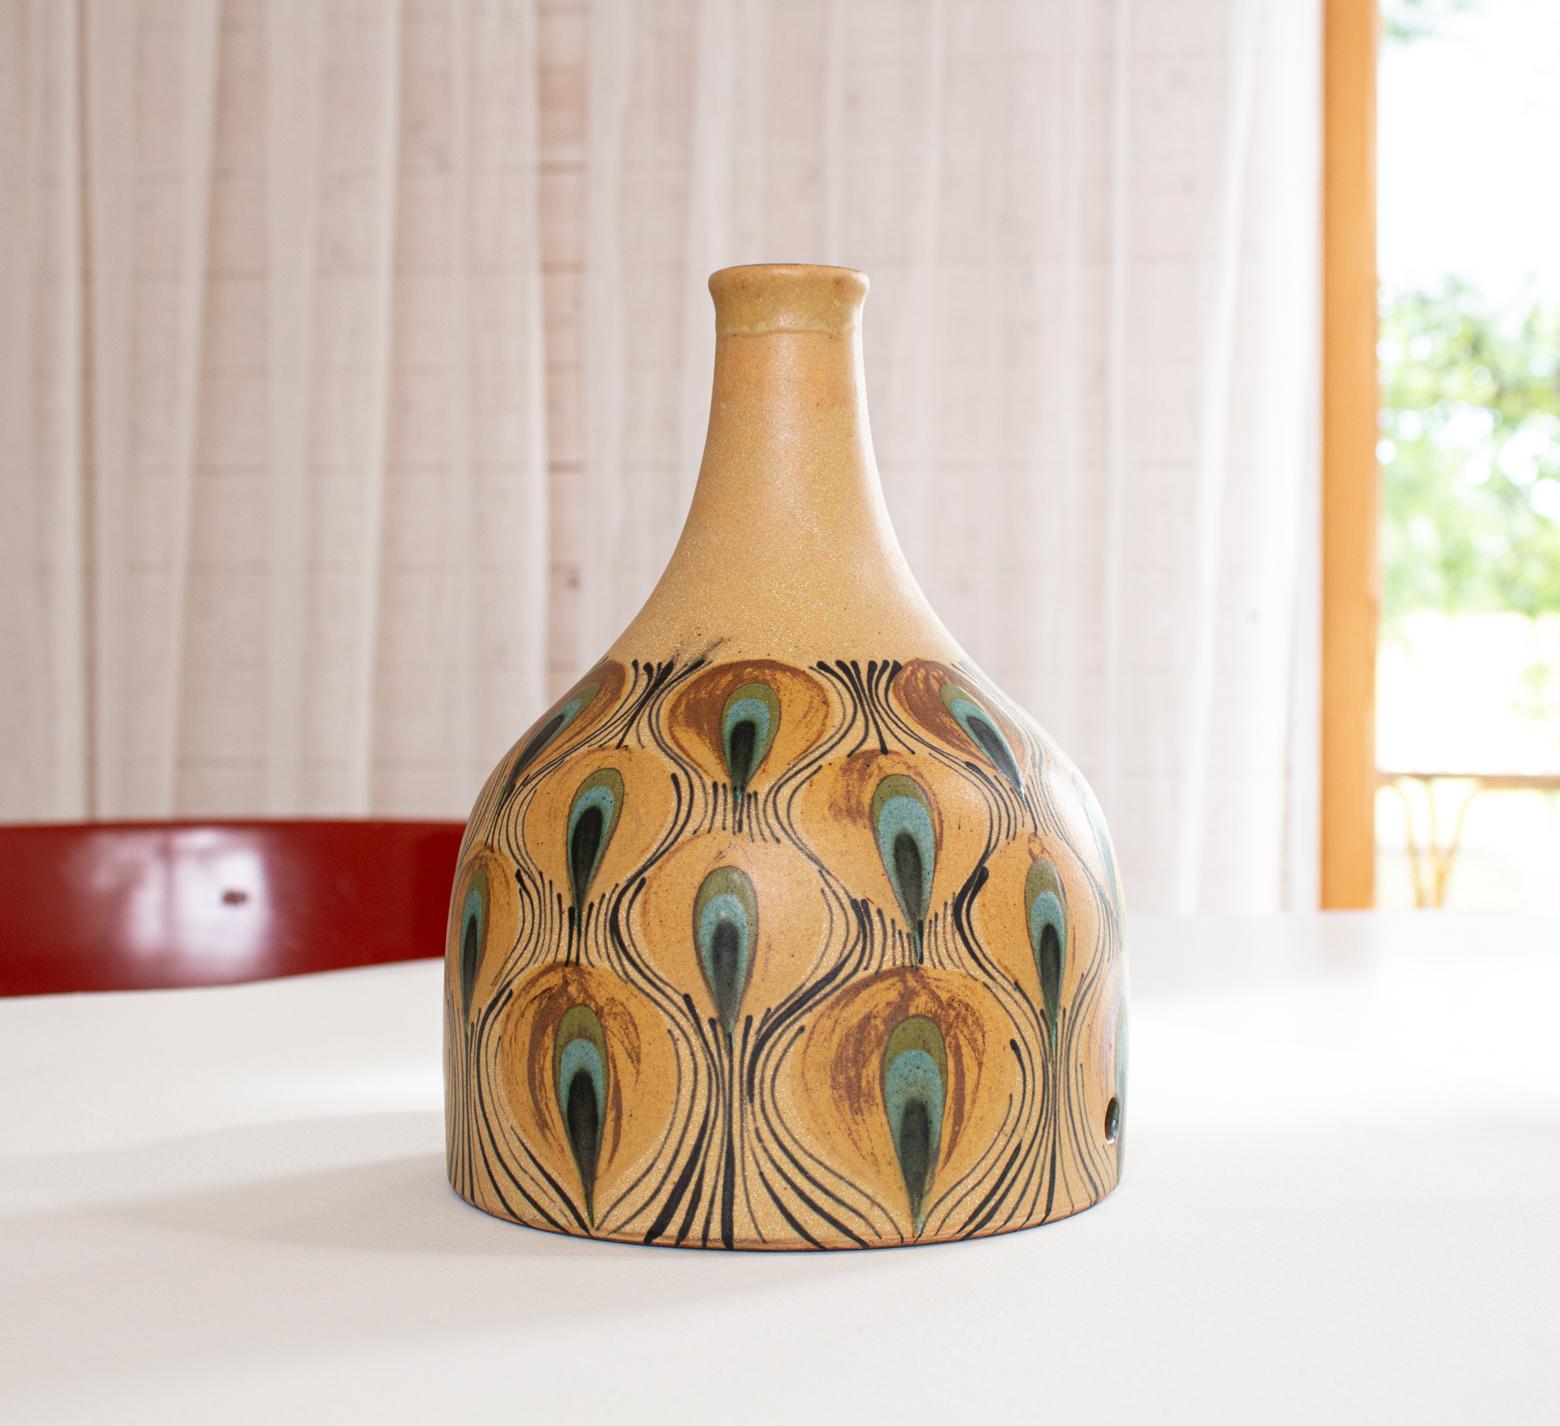 Ceramic Mid-Century Modern Danish Table Lamp with Peacock Pattern by Margrethe Dybdahl For Sale